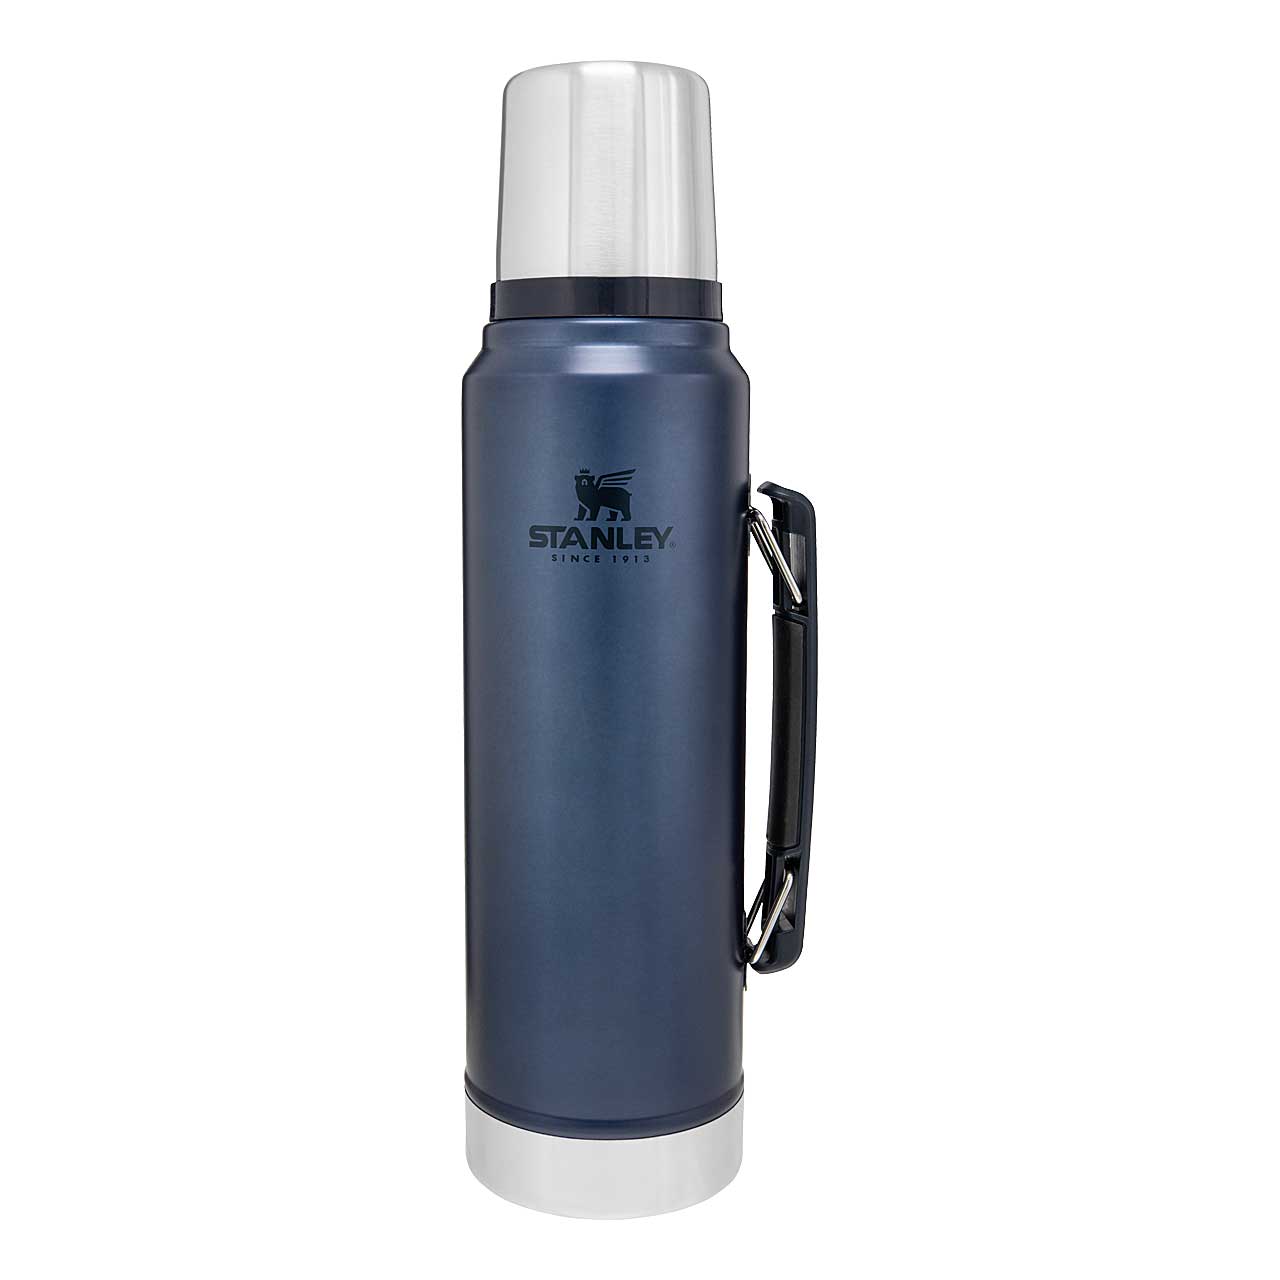 Picture of Stanley Classic Legendary Insulated Bottle - 1.0 liter - Nightfall